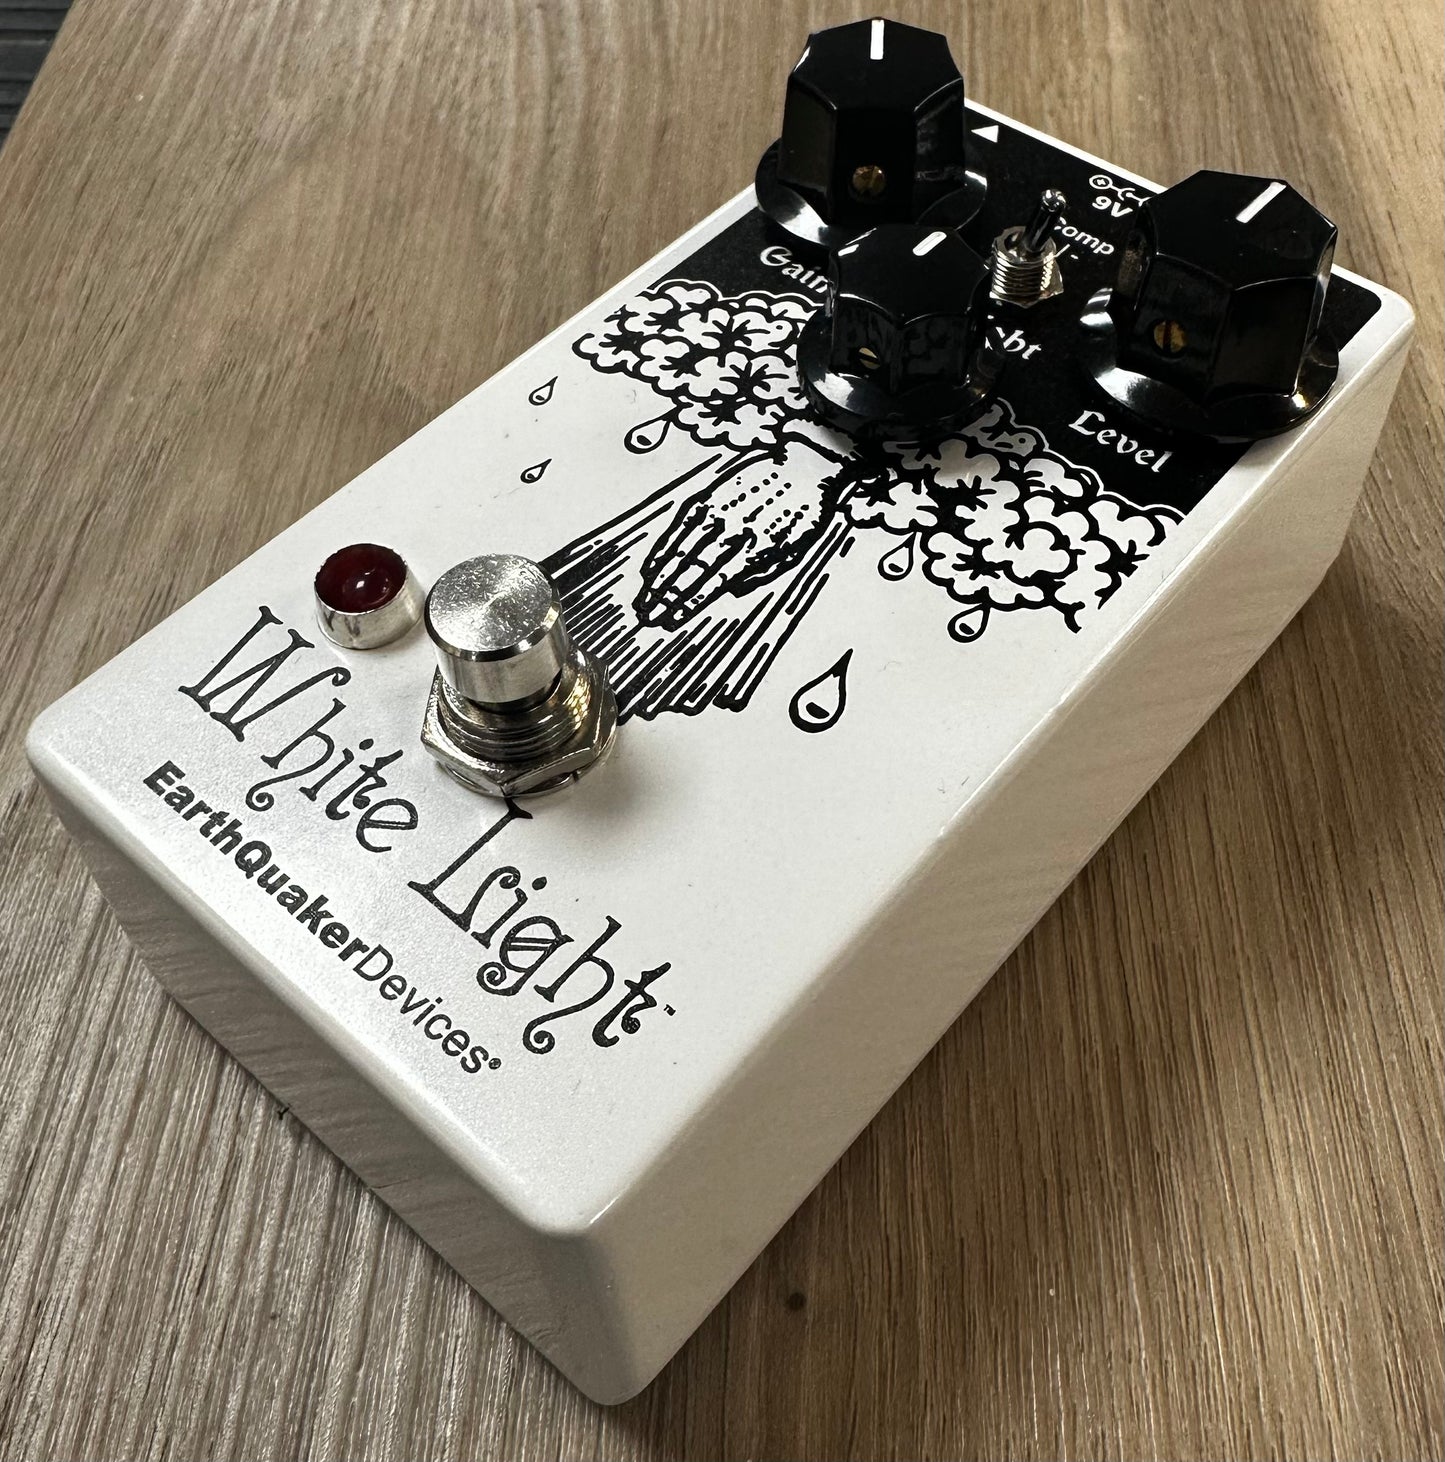 Used Earthquaker Devices White Light Reissue Overdrive Pedal w/box TSS2623